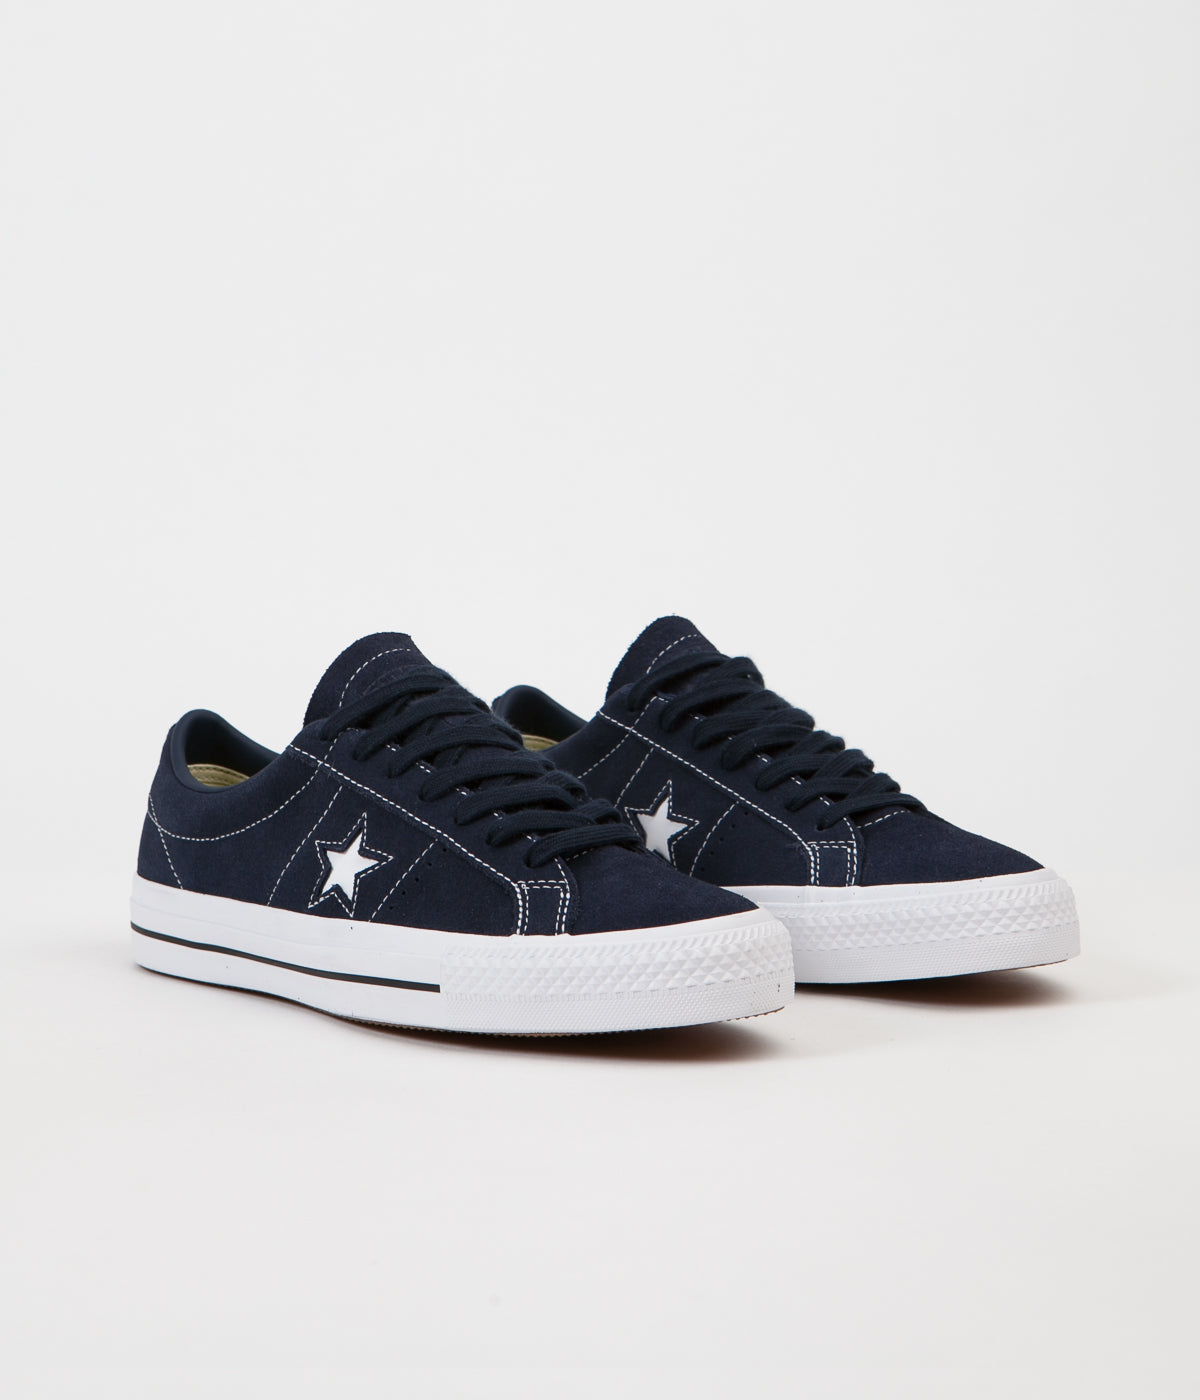 converse one star pro obsidian